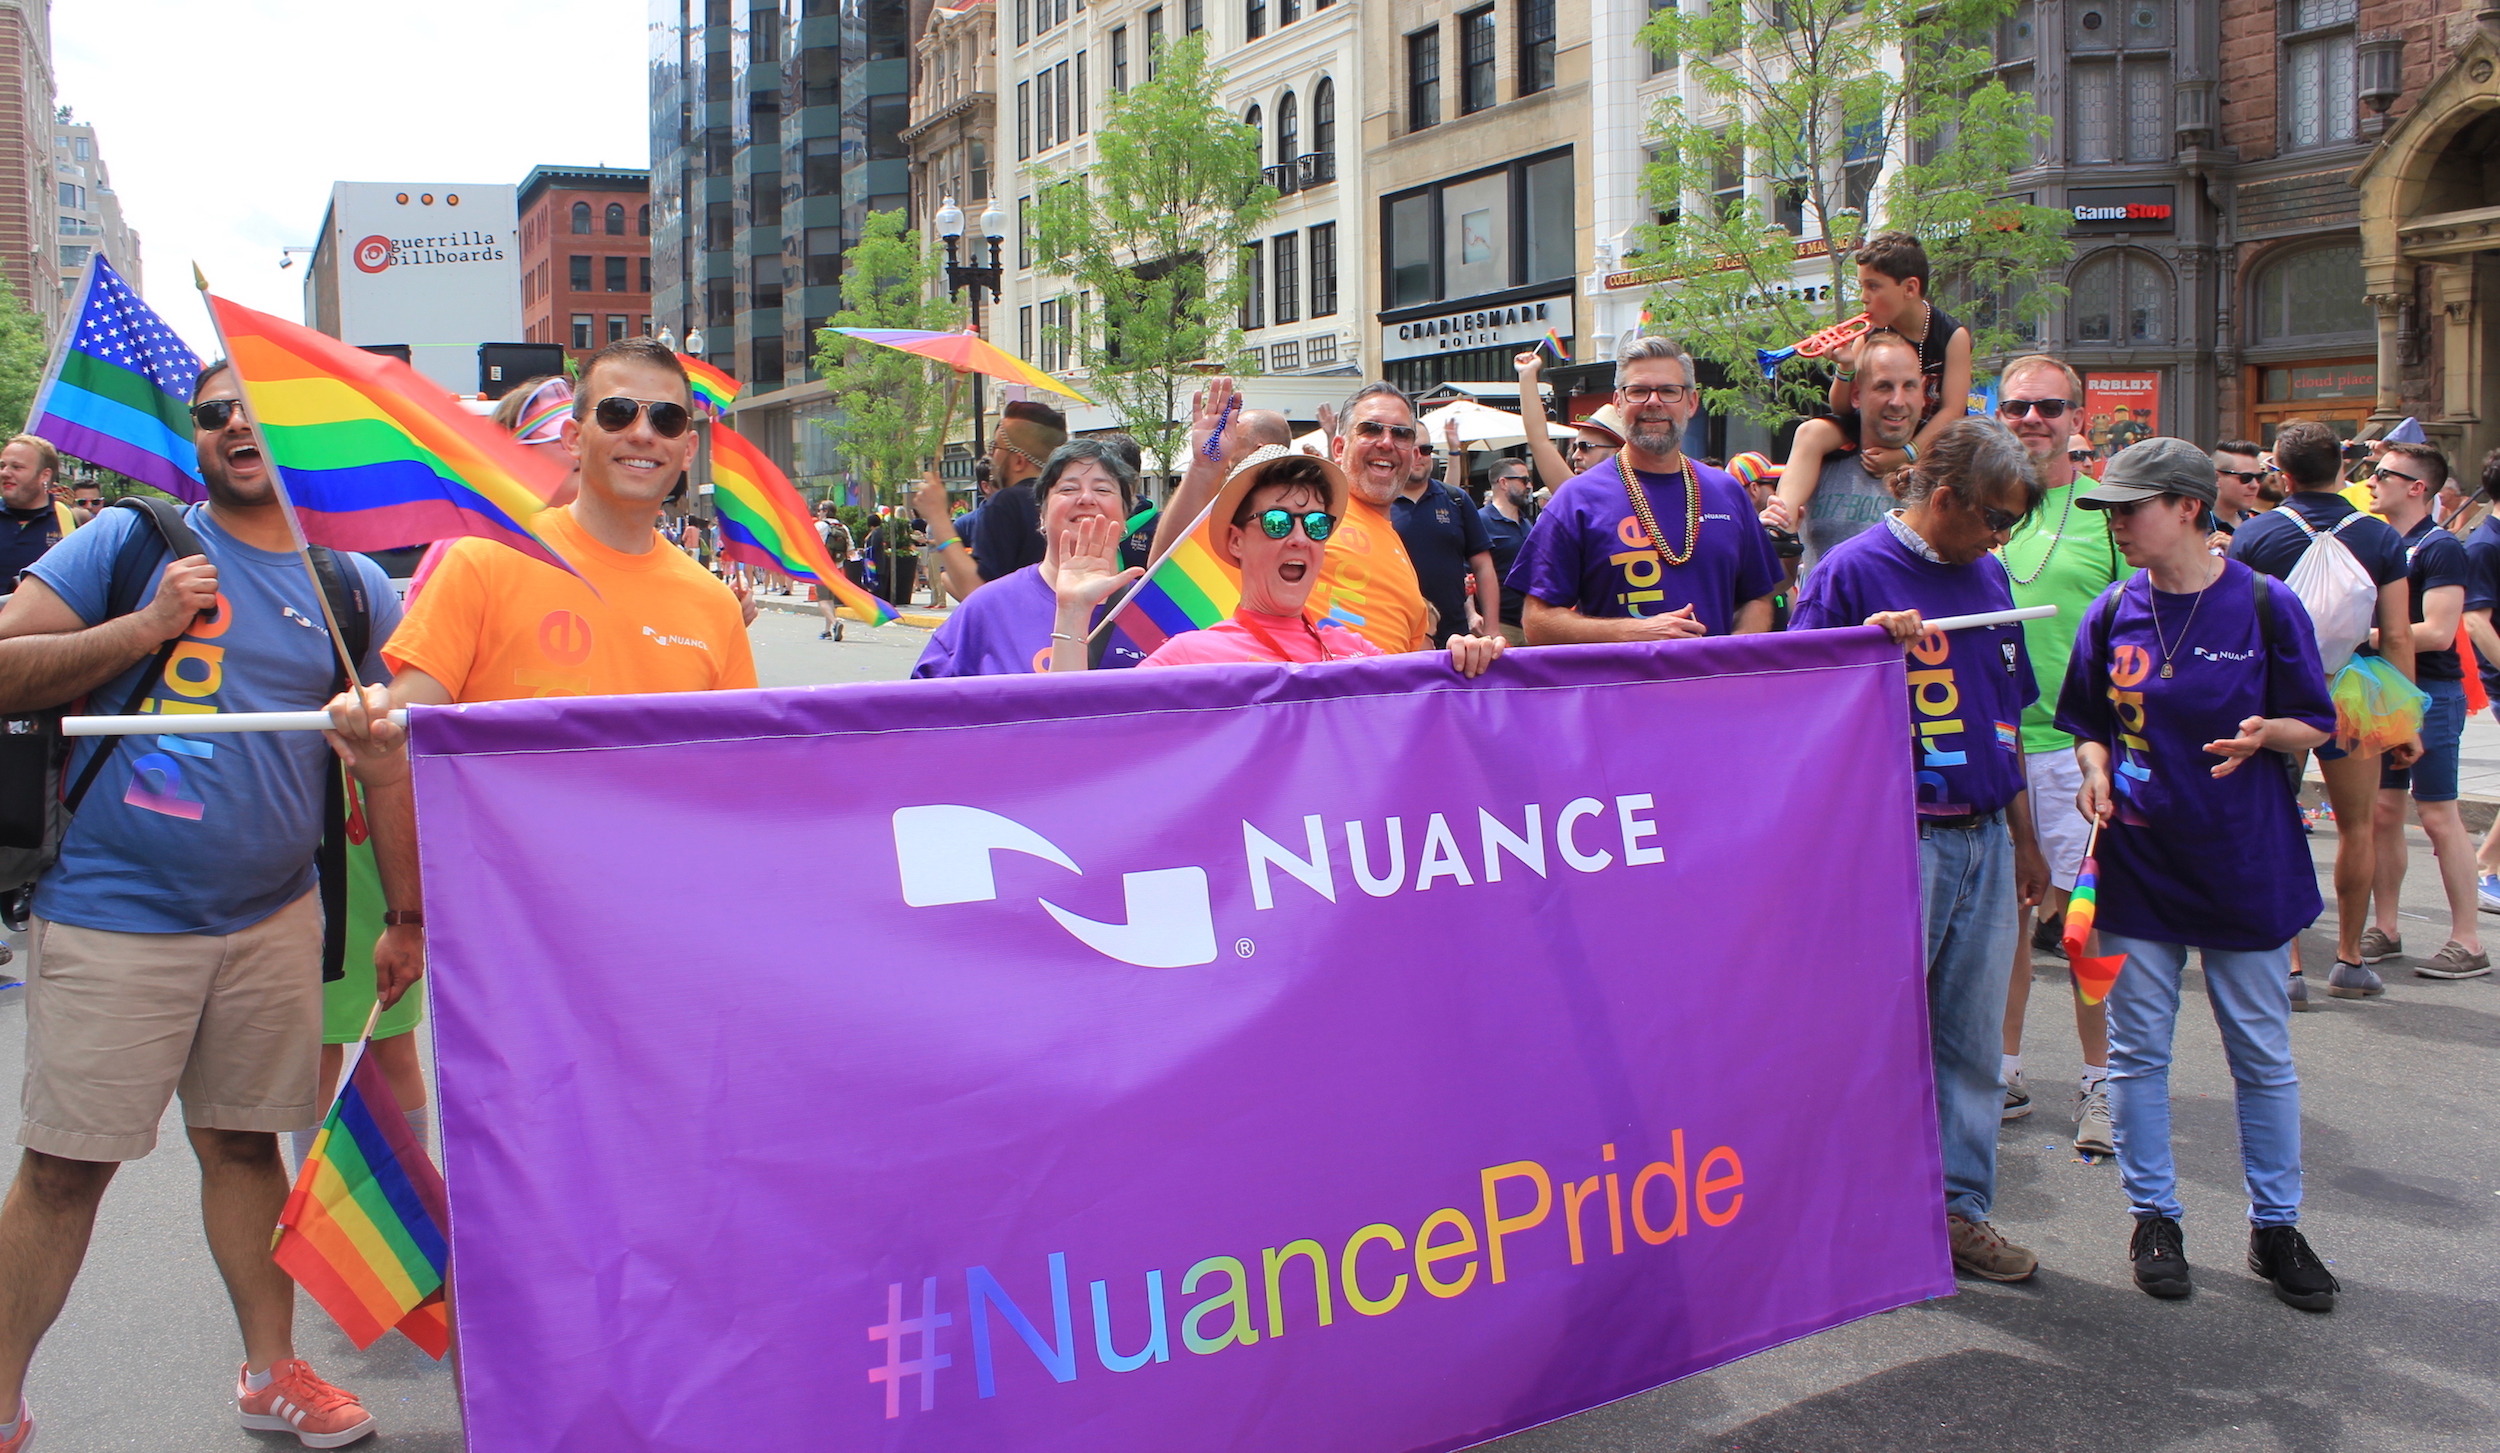 Nuance marches in the Boston Pride Parade on June 9